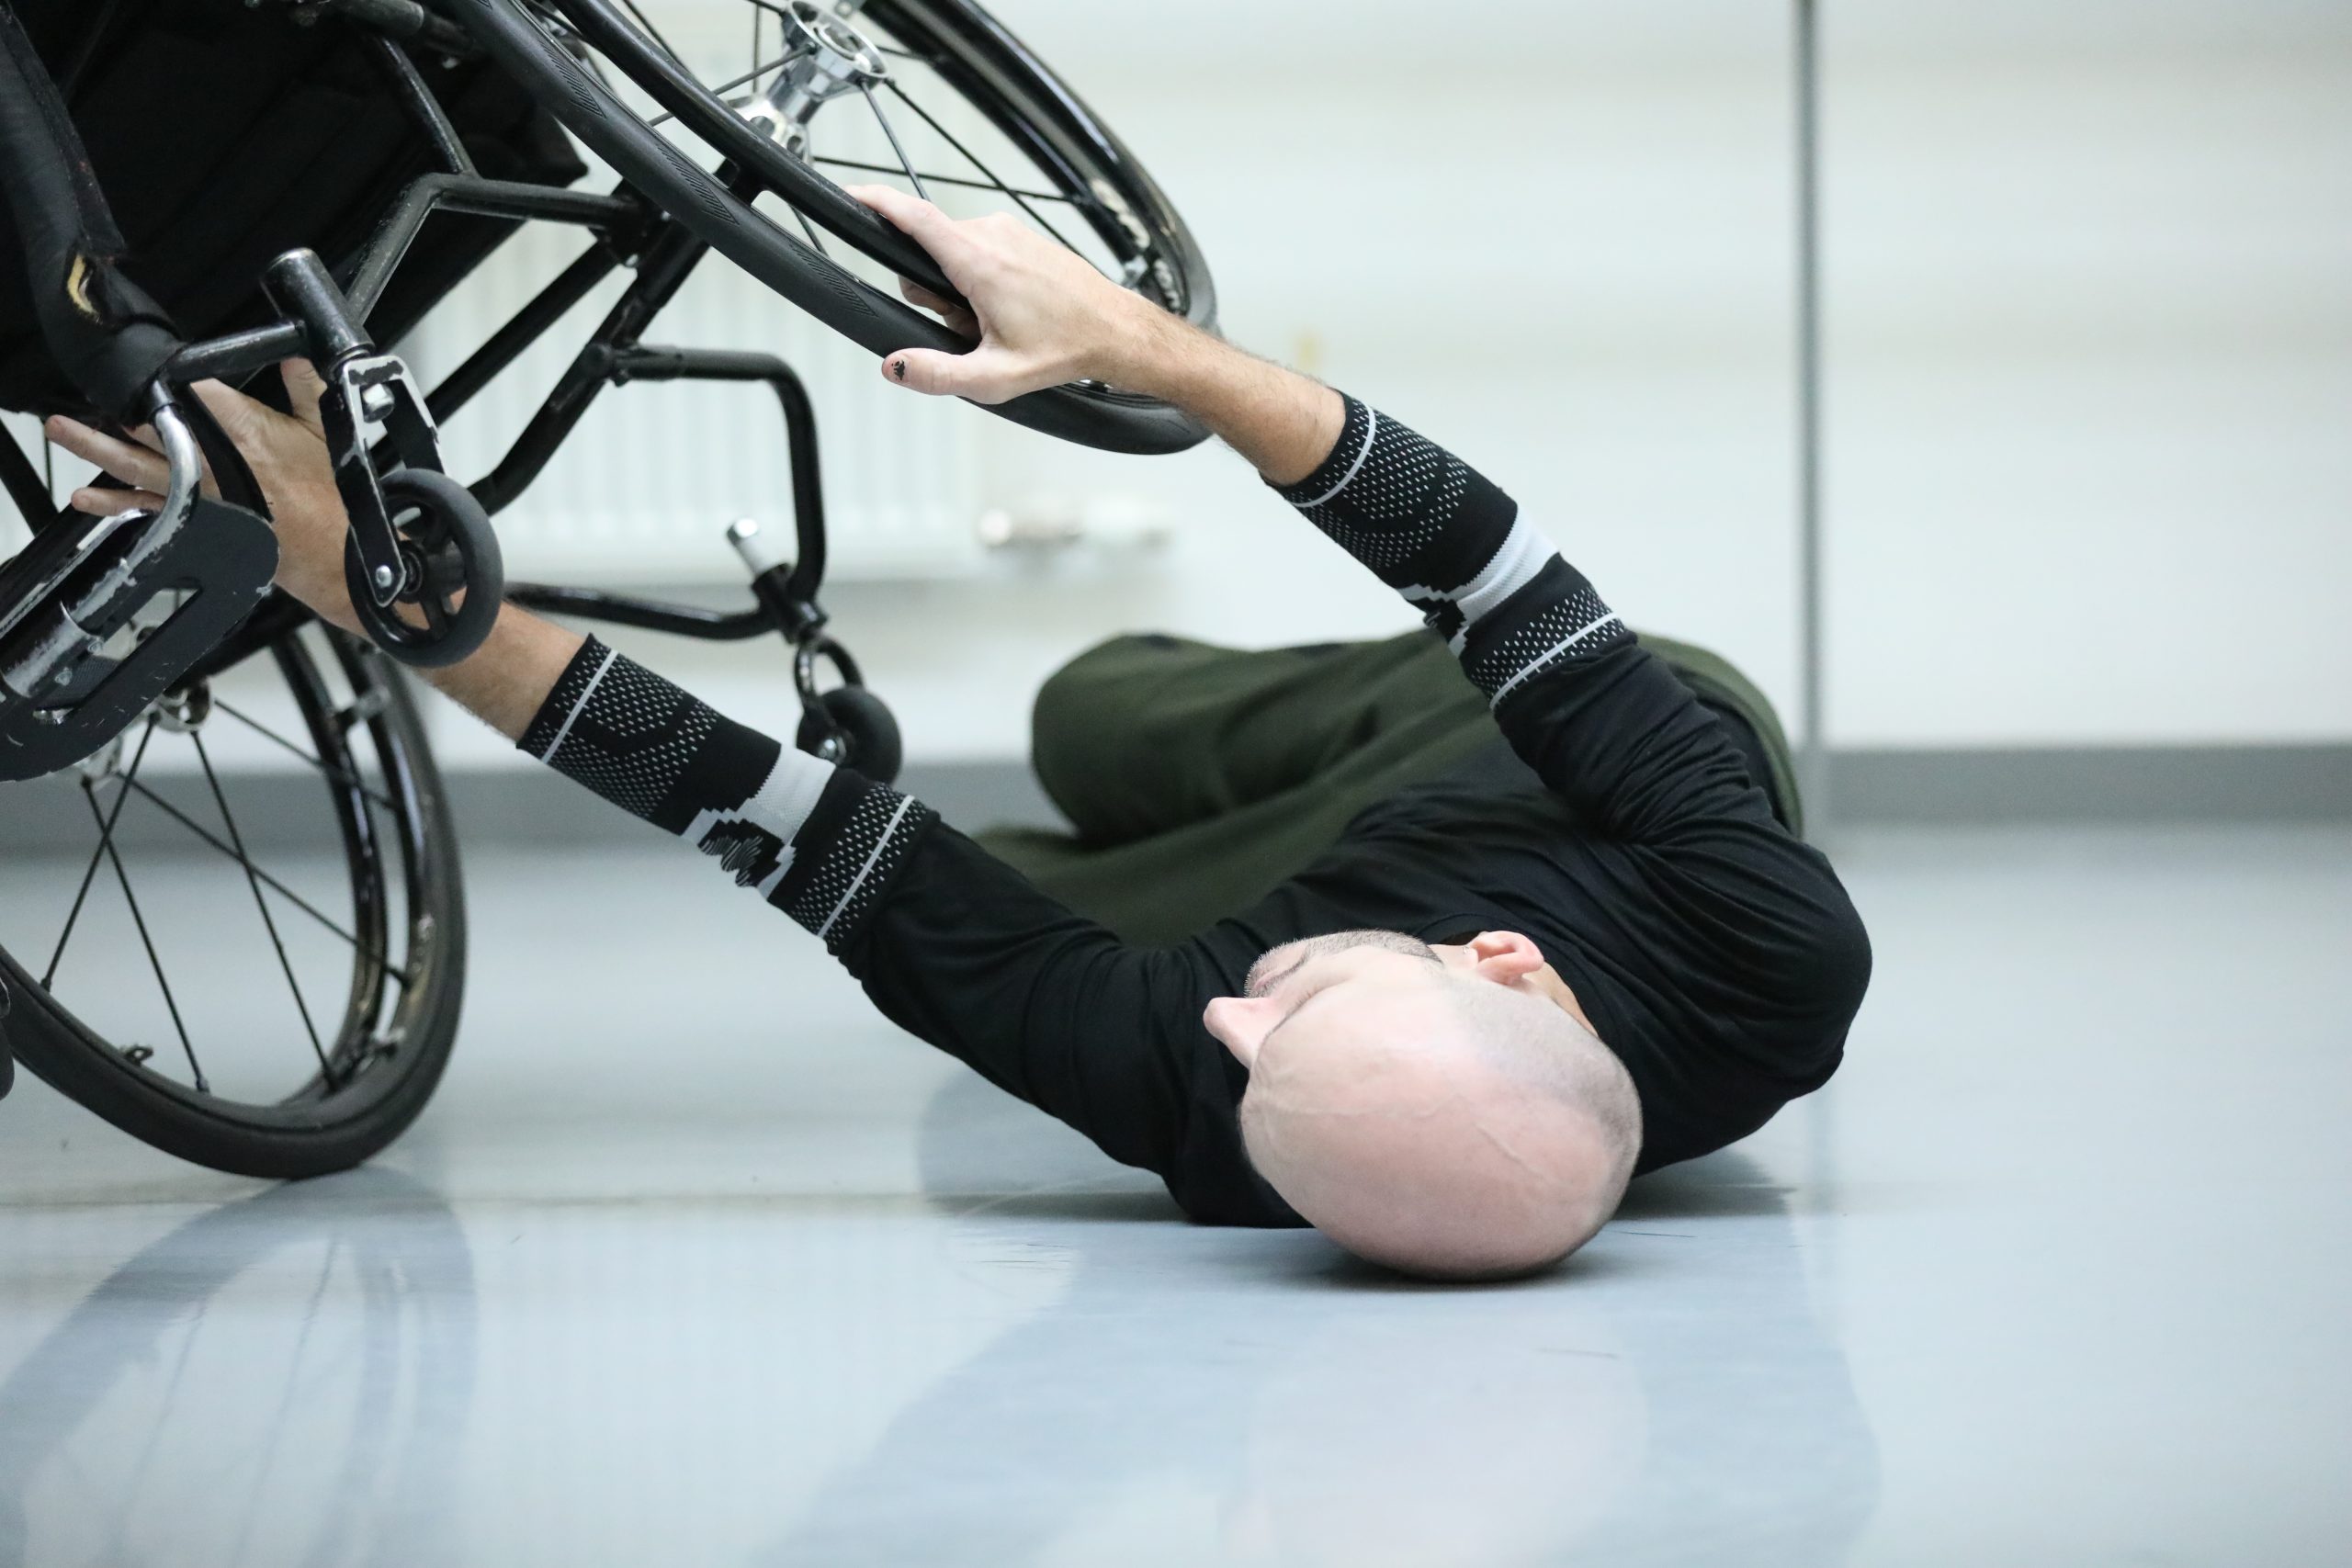 In a dance studio Marc counter balances his wheelchair from the floor, where he lies on his back.